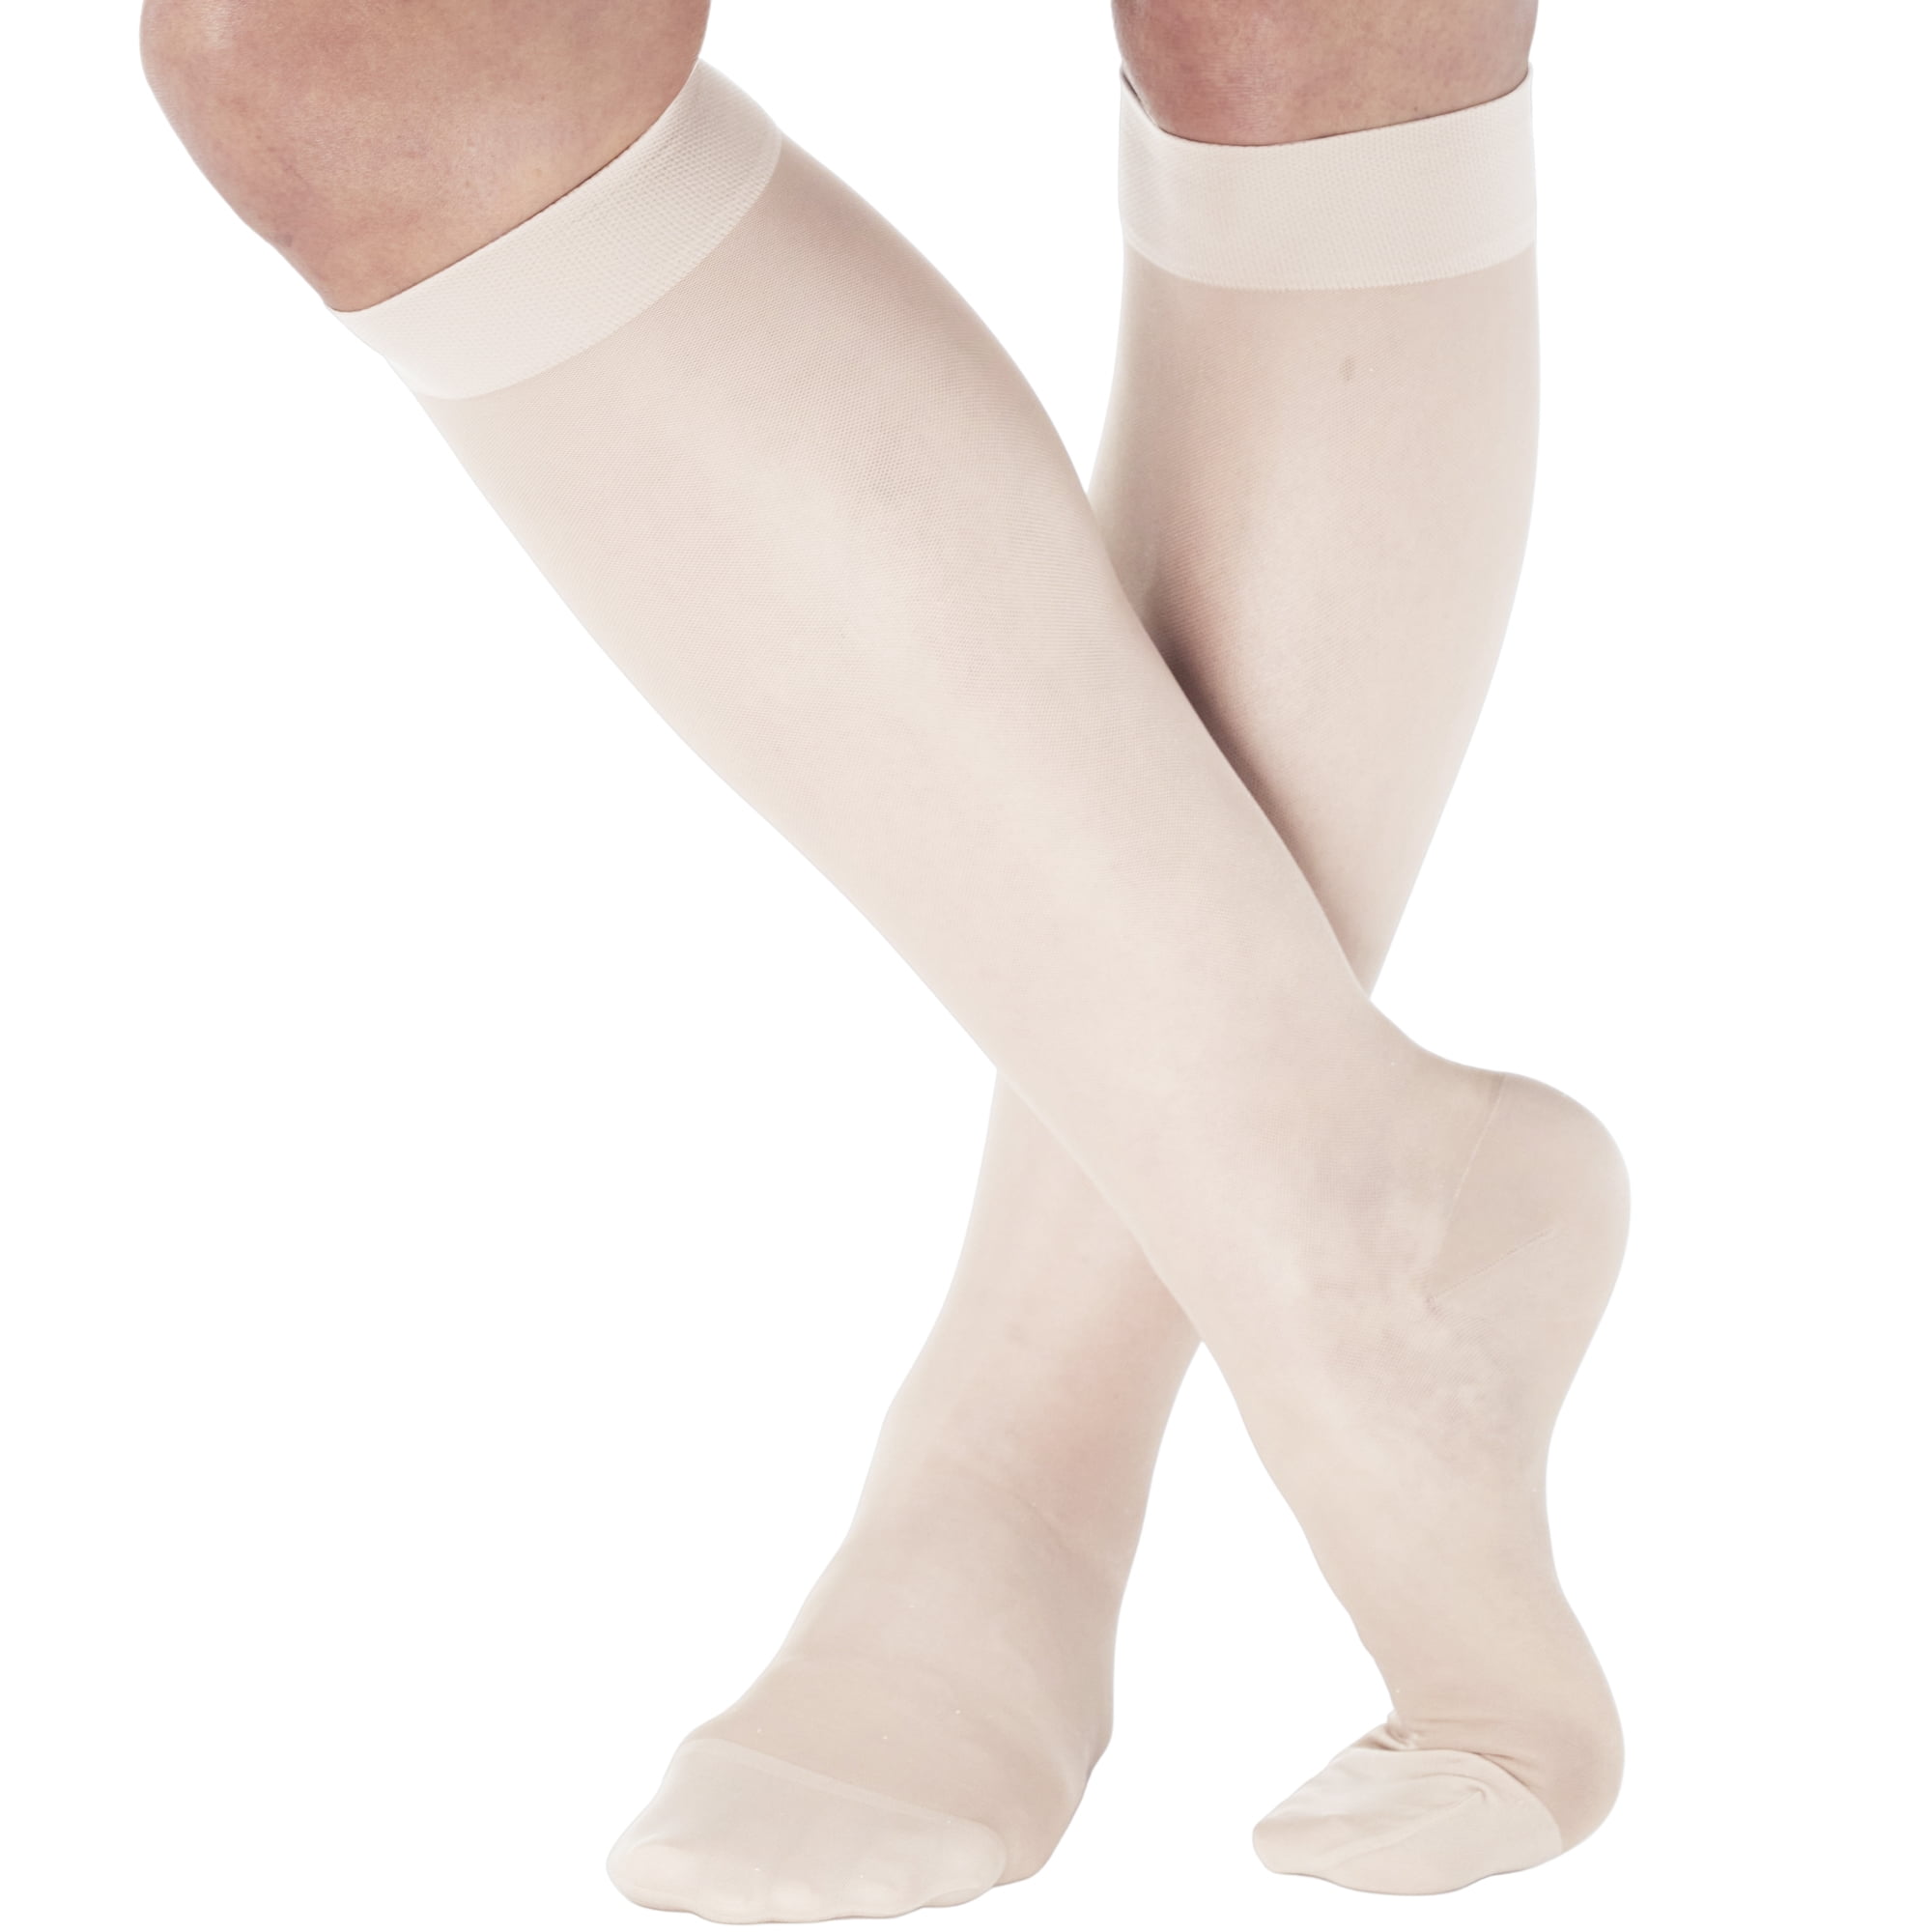 2XL Womens Compression Stockings 15-20mm Hg for Varicose Veins - Beige,  2X-Large 